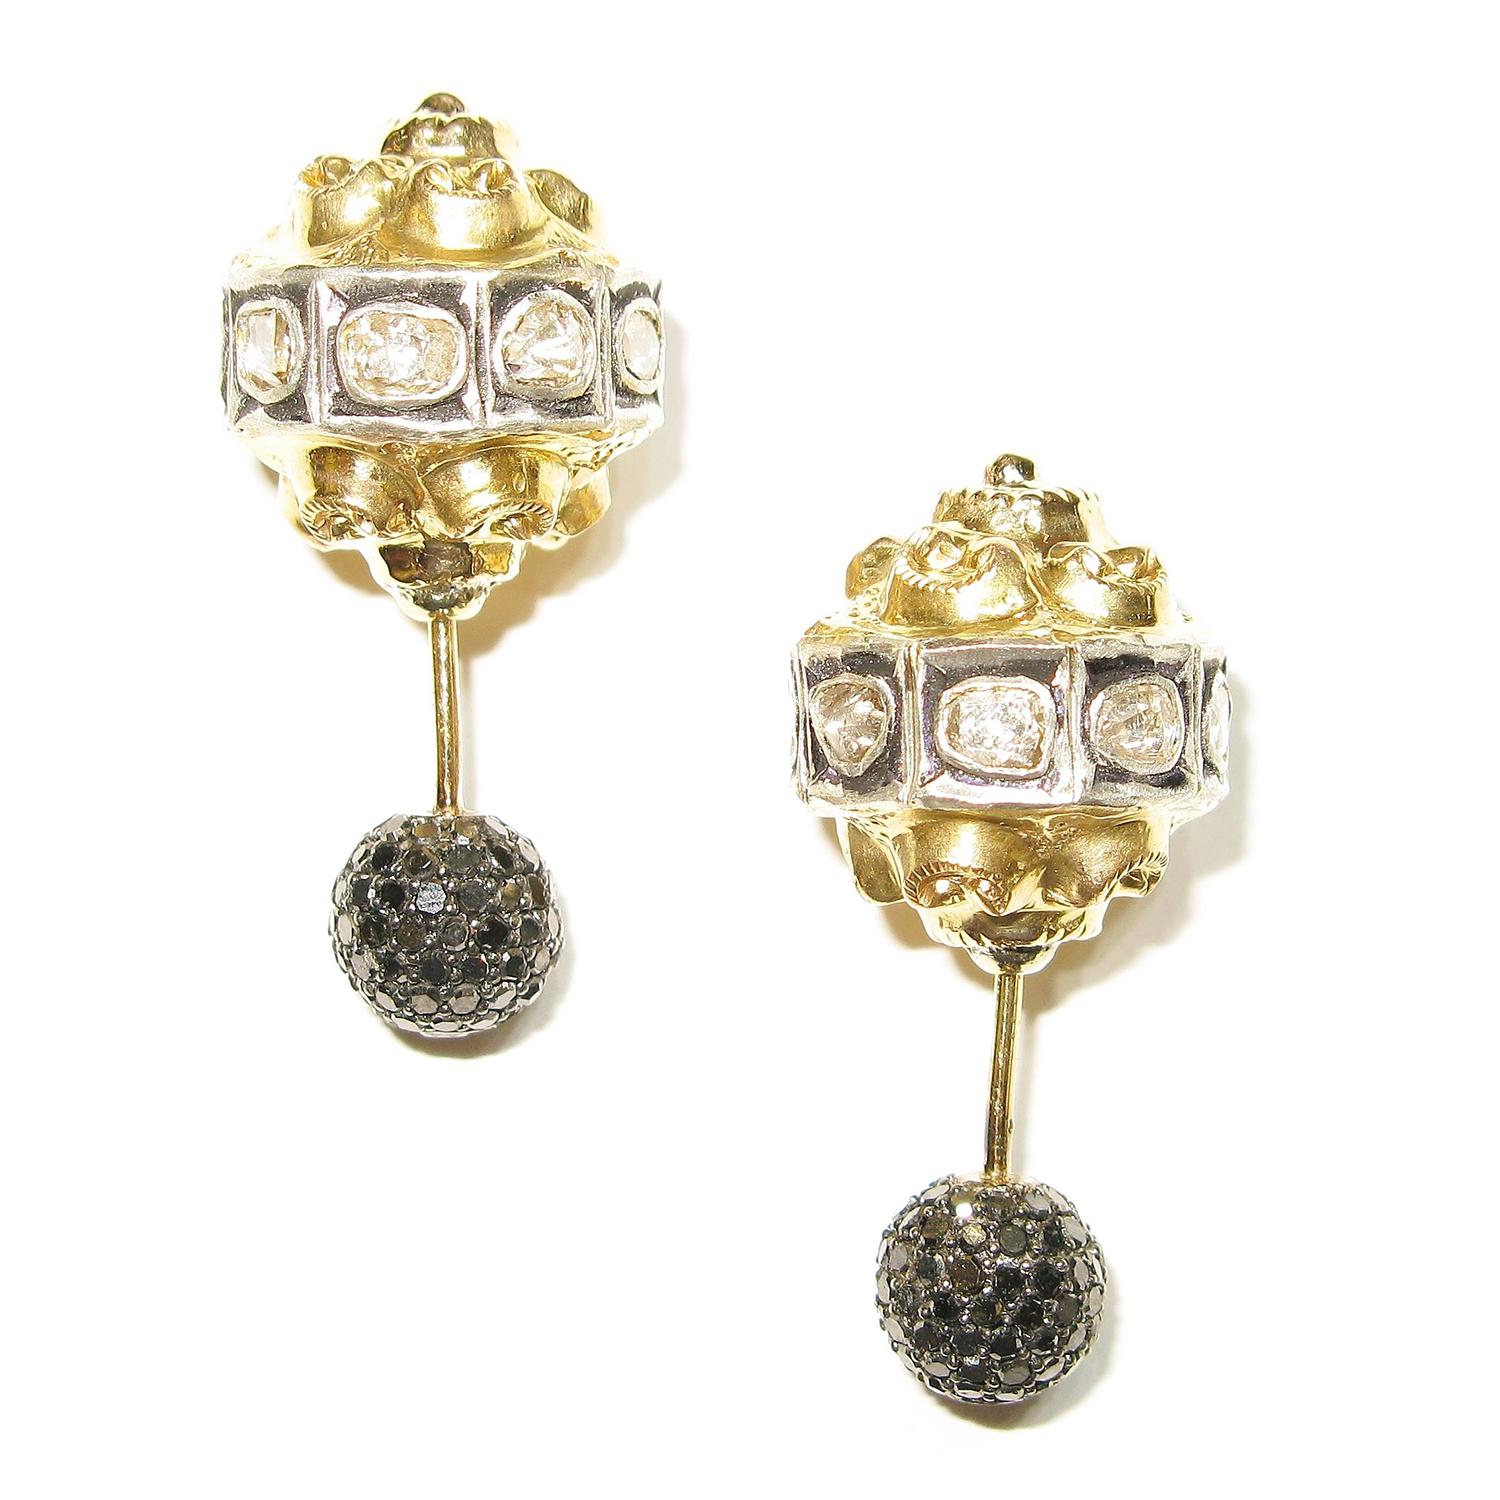 Antique Looking Double Sided Earrings With Diamonds Made In 14k Gold & Silver For Sale